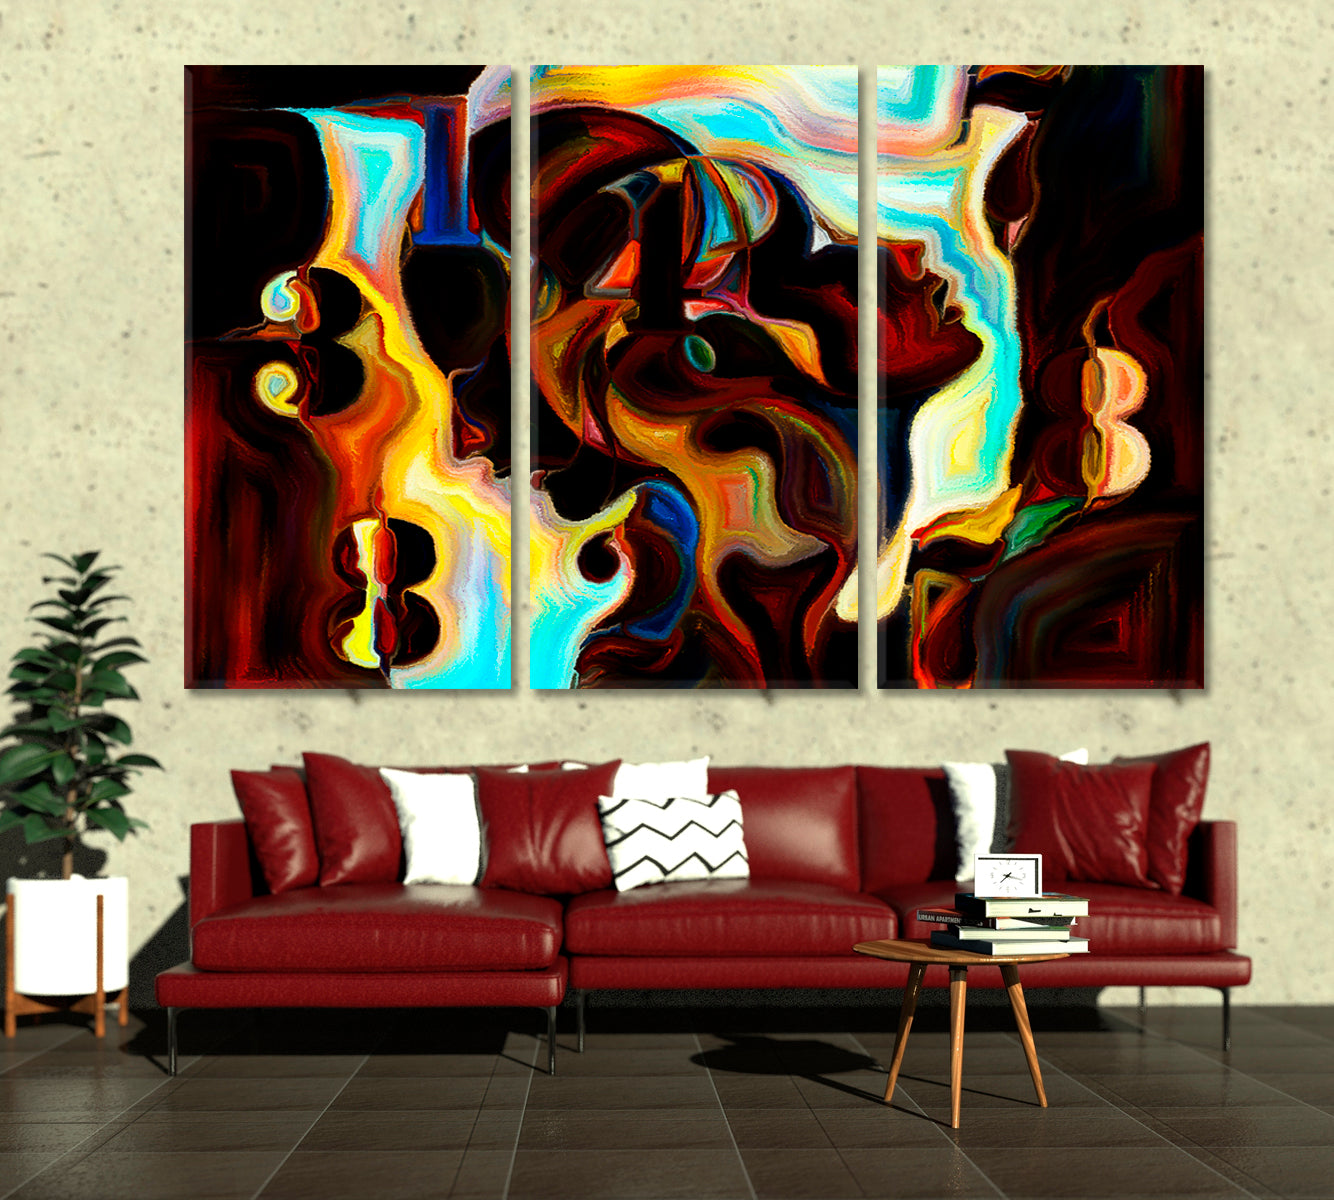 Abstract Forms Shapes Unique Design Wall Art Canvas Print Contemporary Art Artesty 3 panels 36" x 24" 